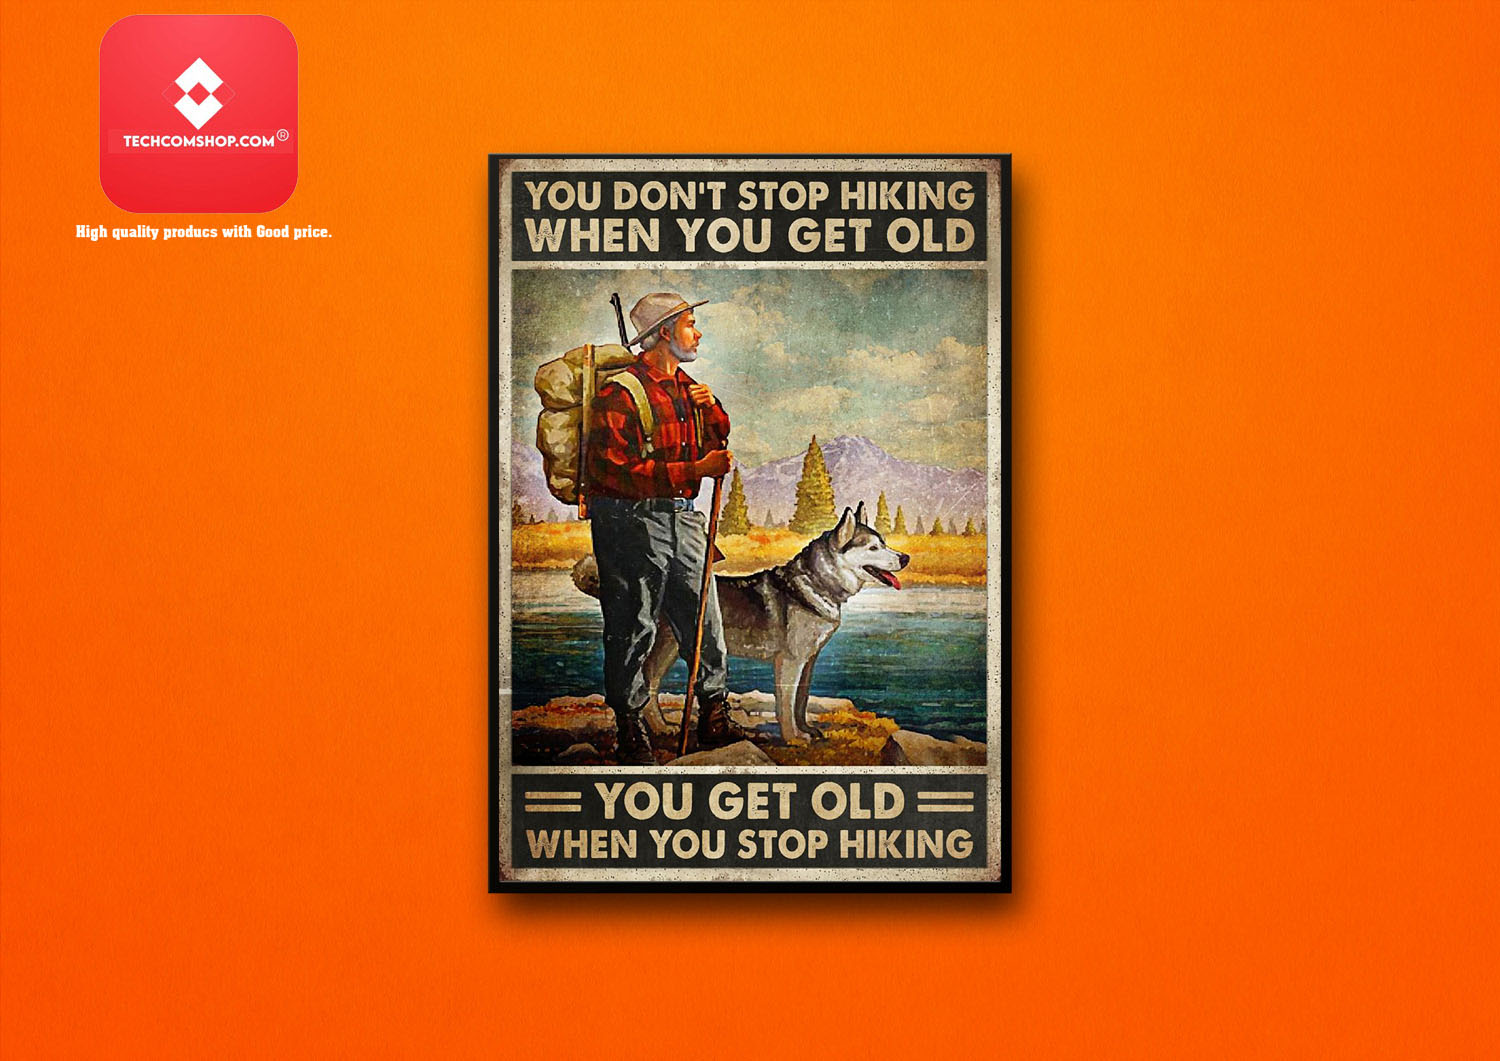 You don't stop hiking when you get old poster13